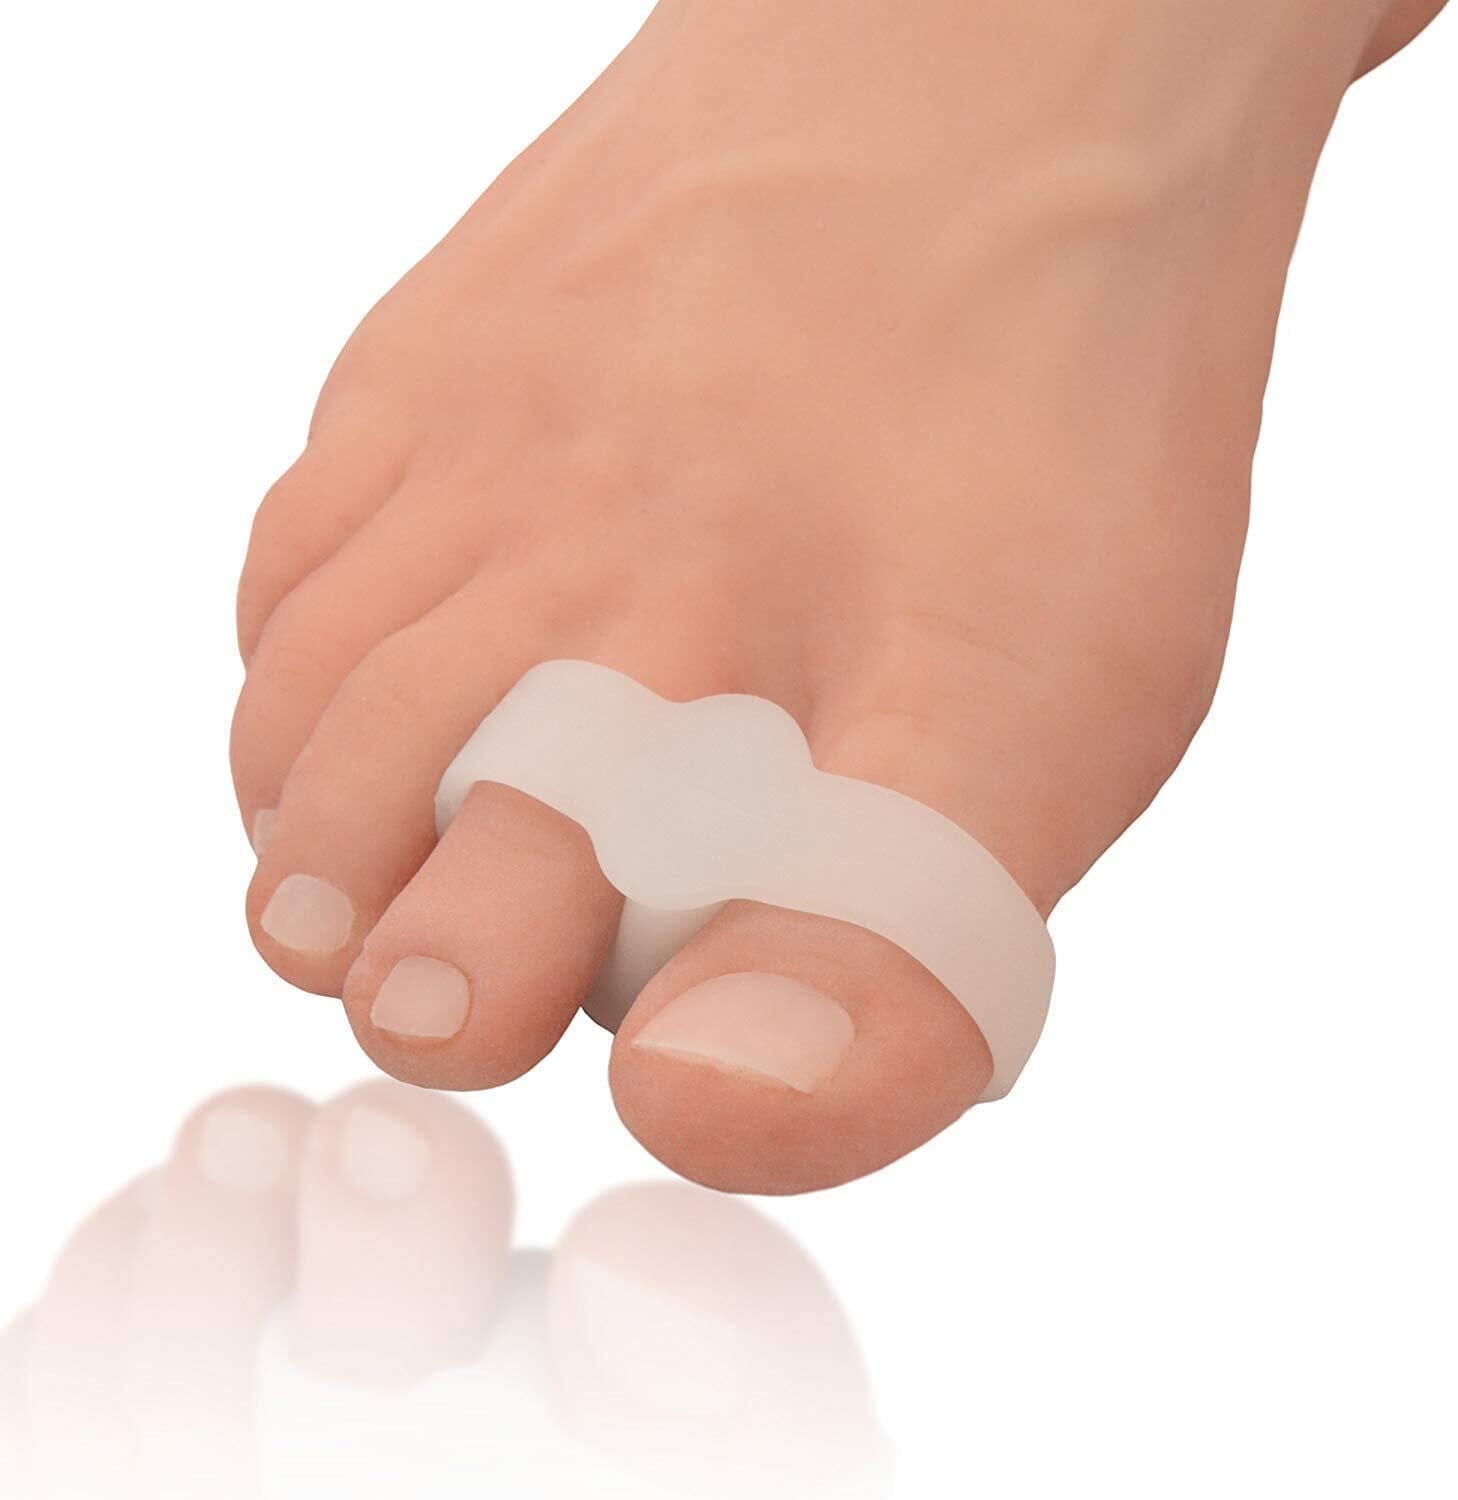 Dr. Frederick's Original Sport Bunion Toe Spacer Set - 4Pcs - Soft Gel Splints - One Size Fits All - Fast Relief - Wear with Shoes - for Men & Women Foot Pain Dr. Frederick's Original 